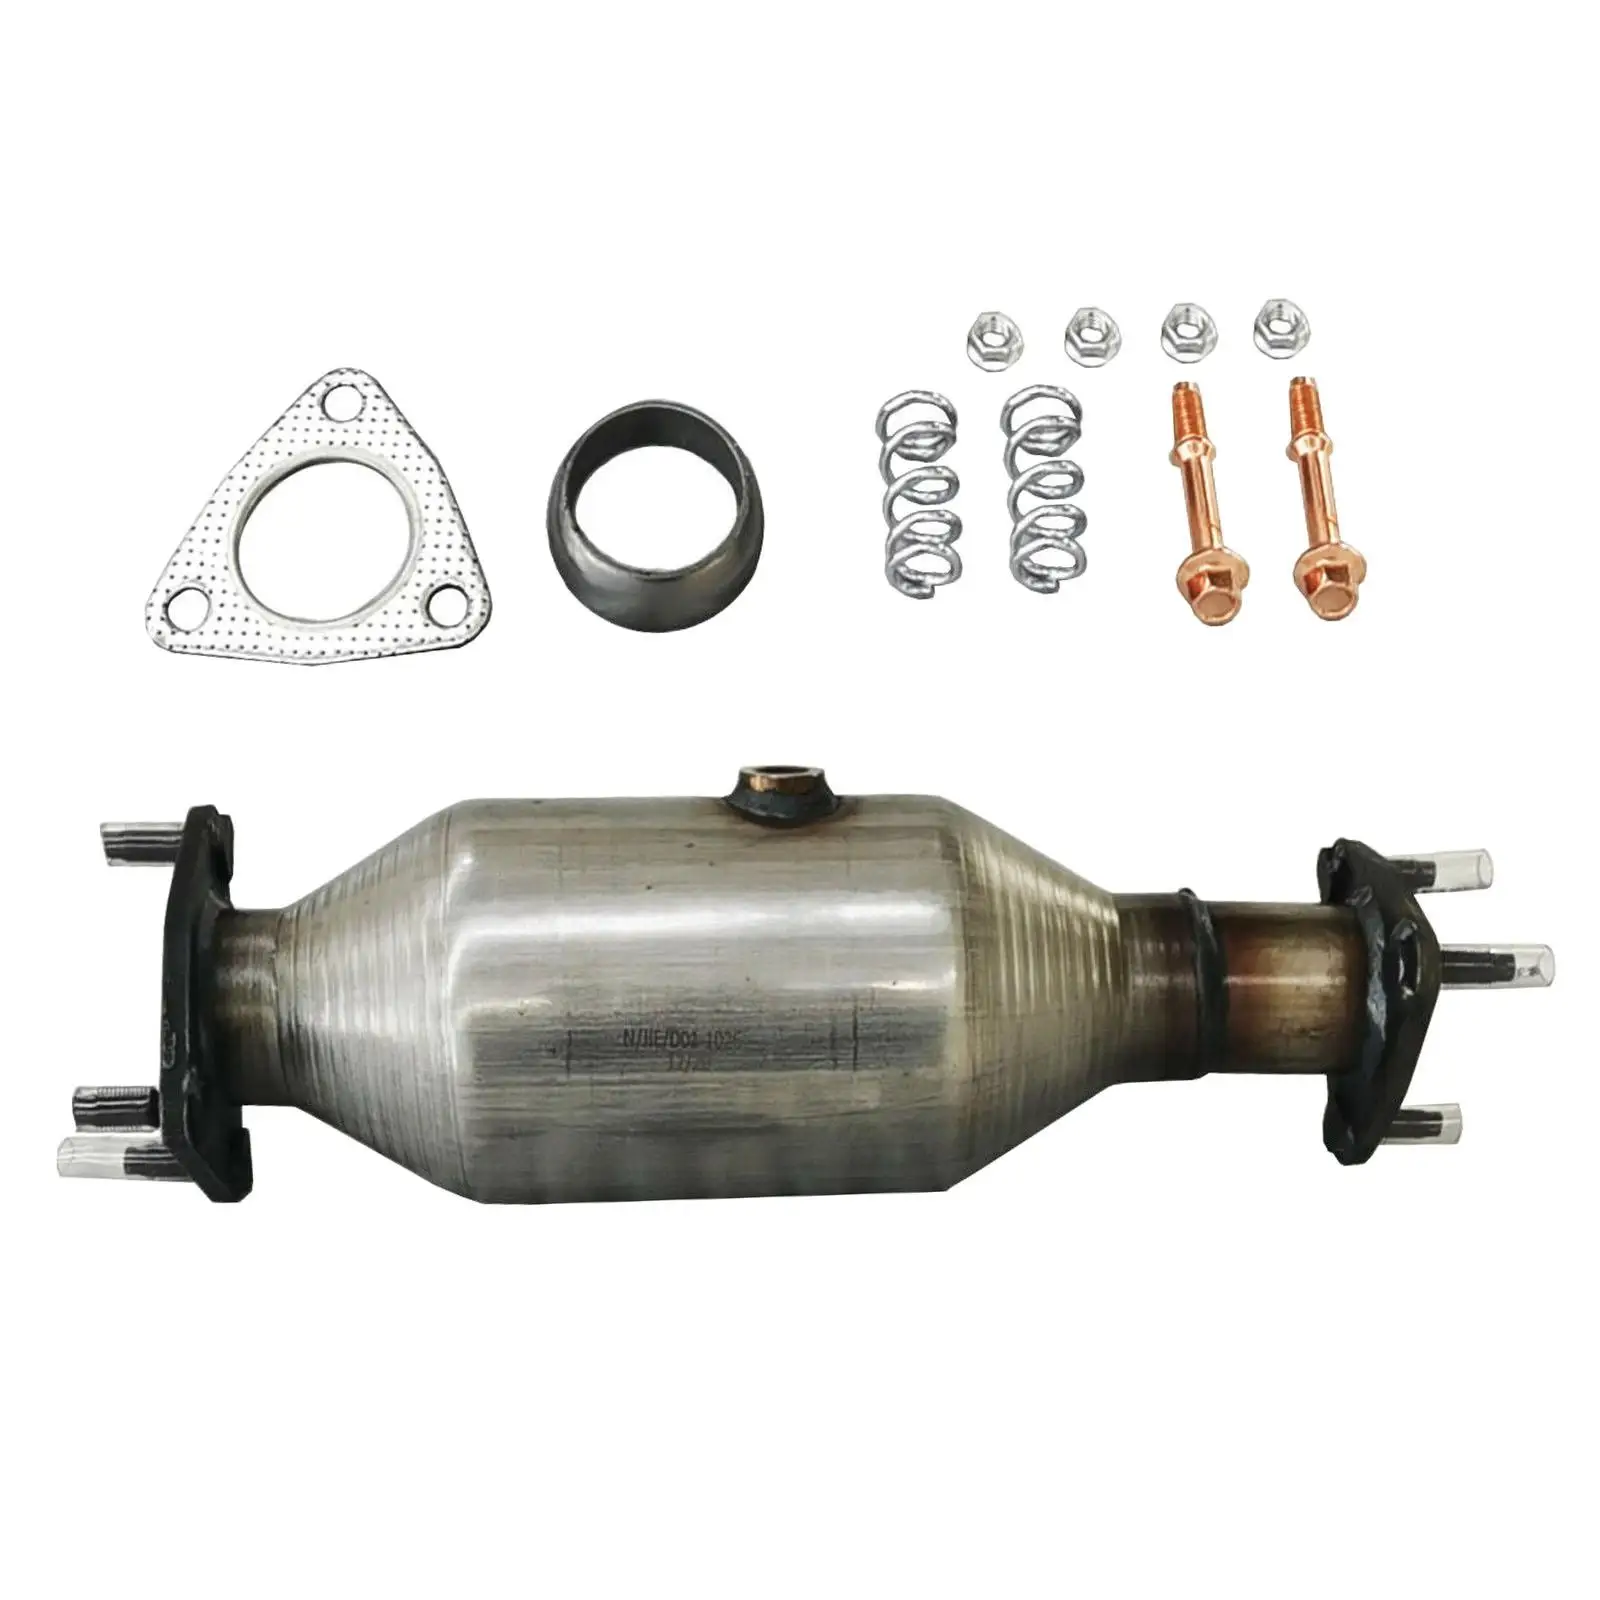 Stainless Steel Catalytic Converter with Accessories for Honda Accord SE Value 2.3L 4cyl